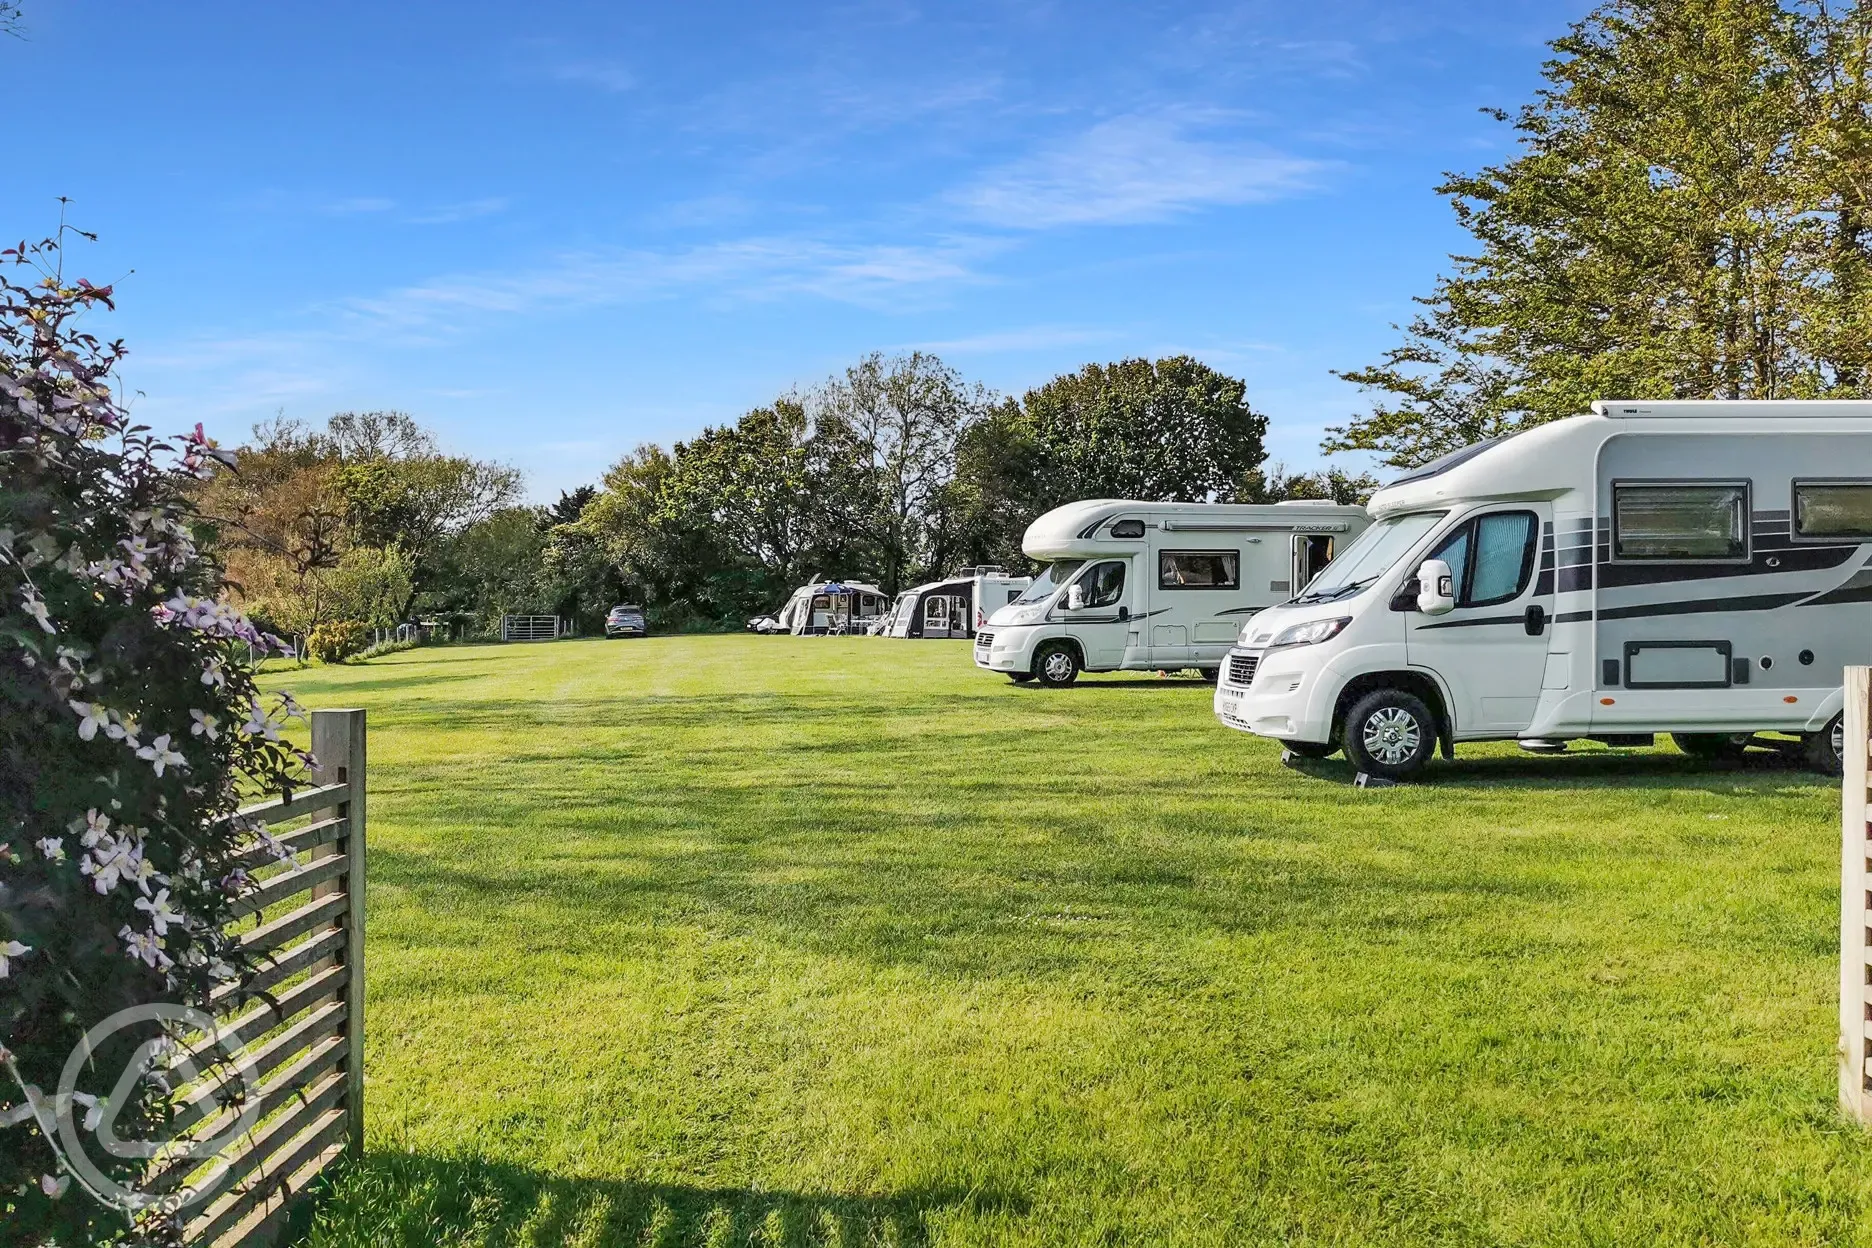 Electric grass touring pitches - Caravan and Motorhome Club members only